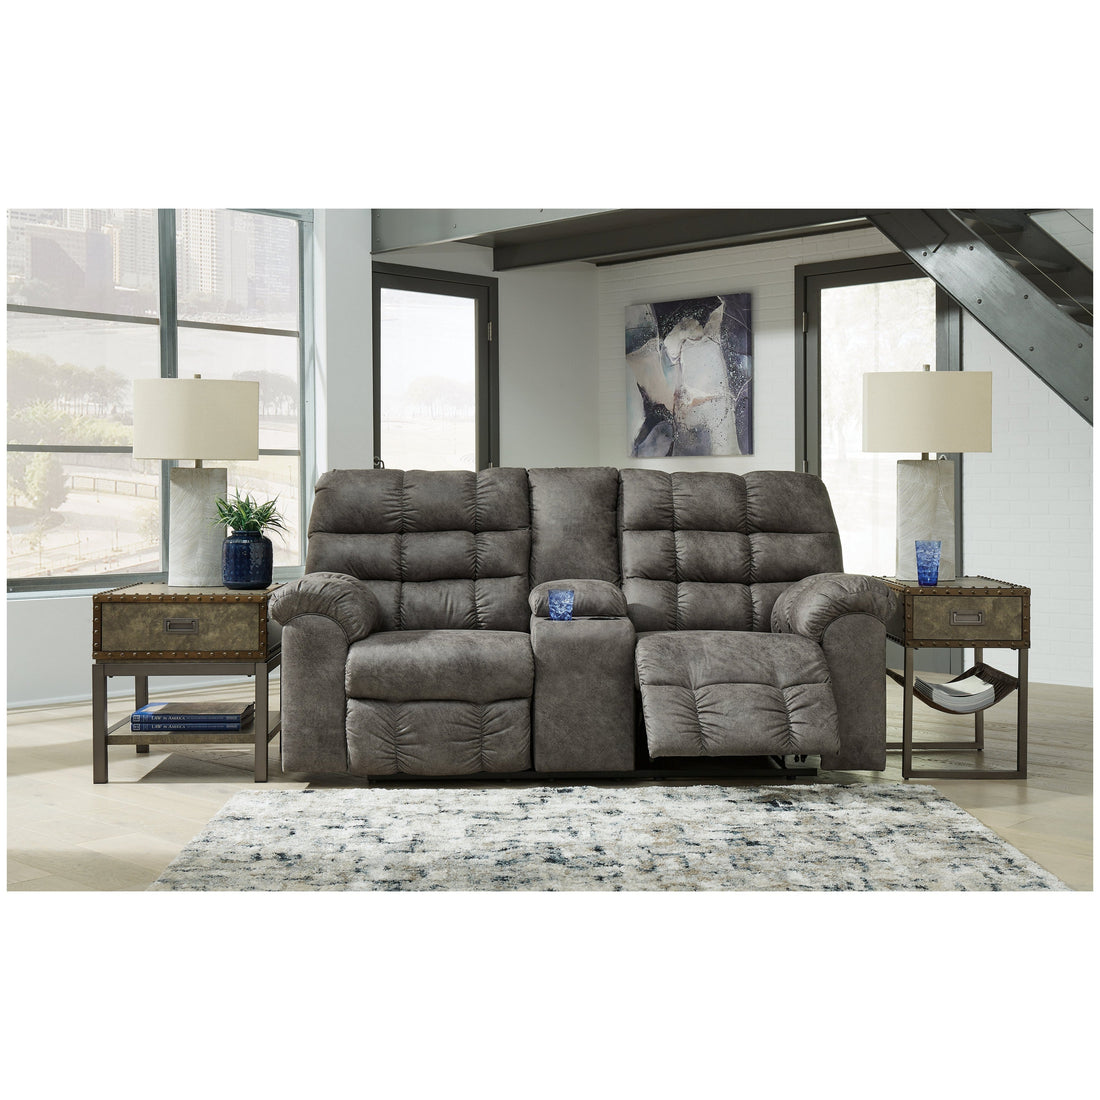 Derwin Reclining Loveseat with Console Ash-2840294